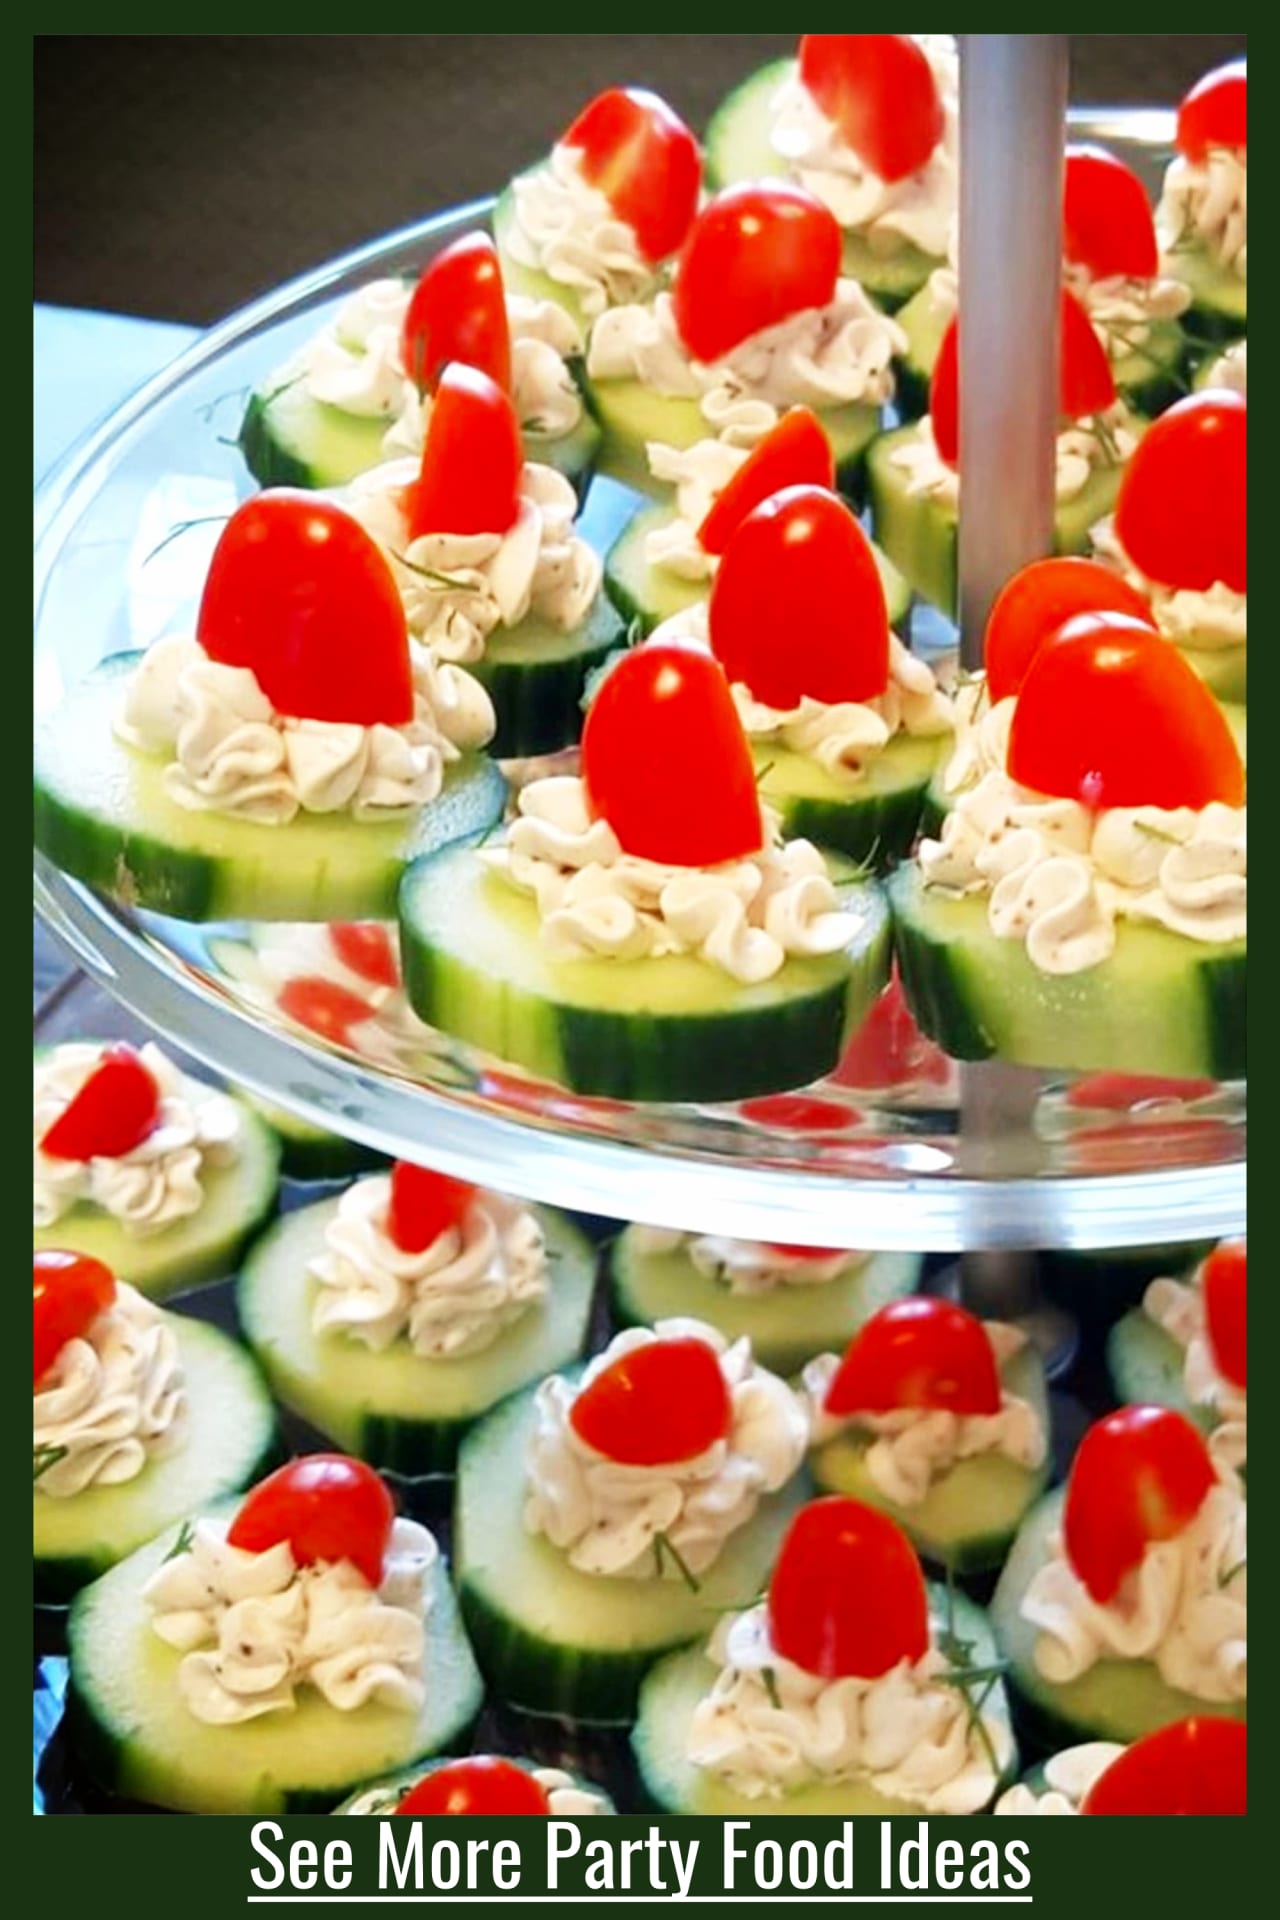 Block party food appetizers - easy party appetizer ideas for feeding a crowd - Simple summer party appetizer and salads ideas